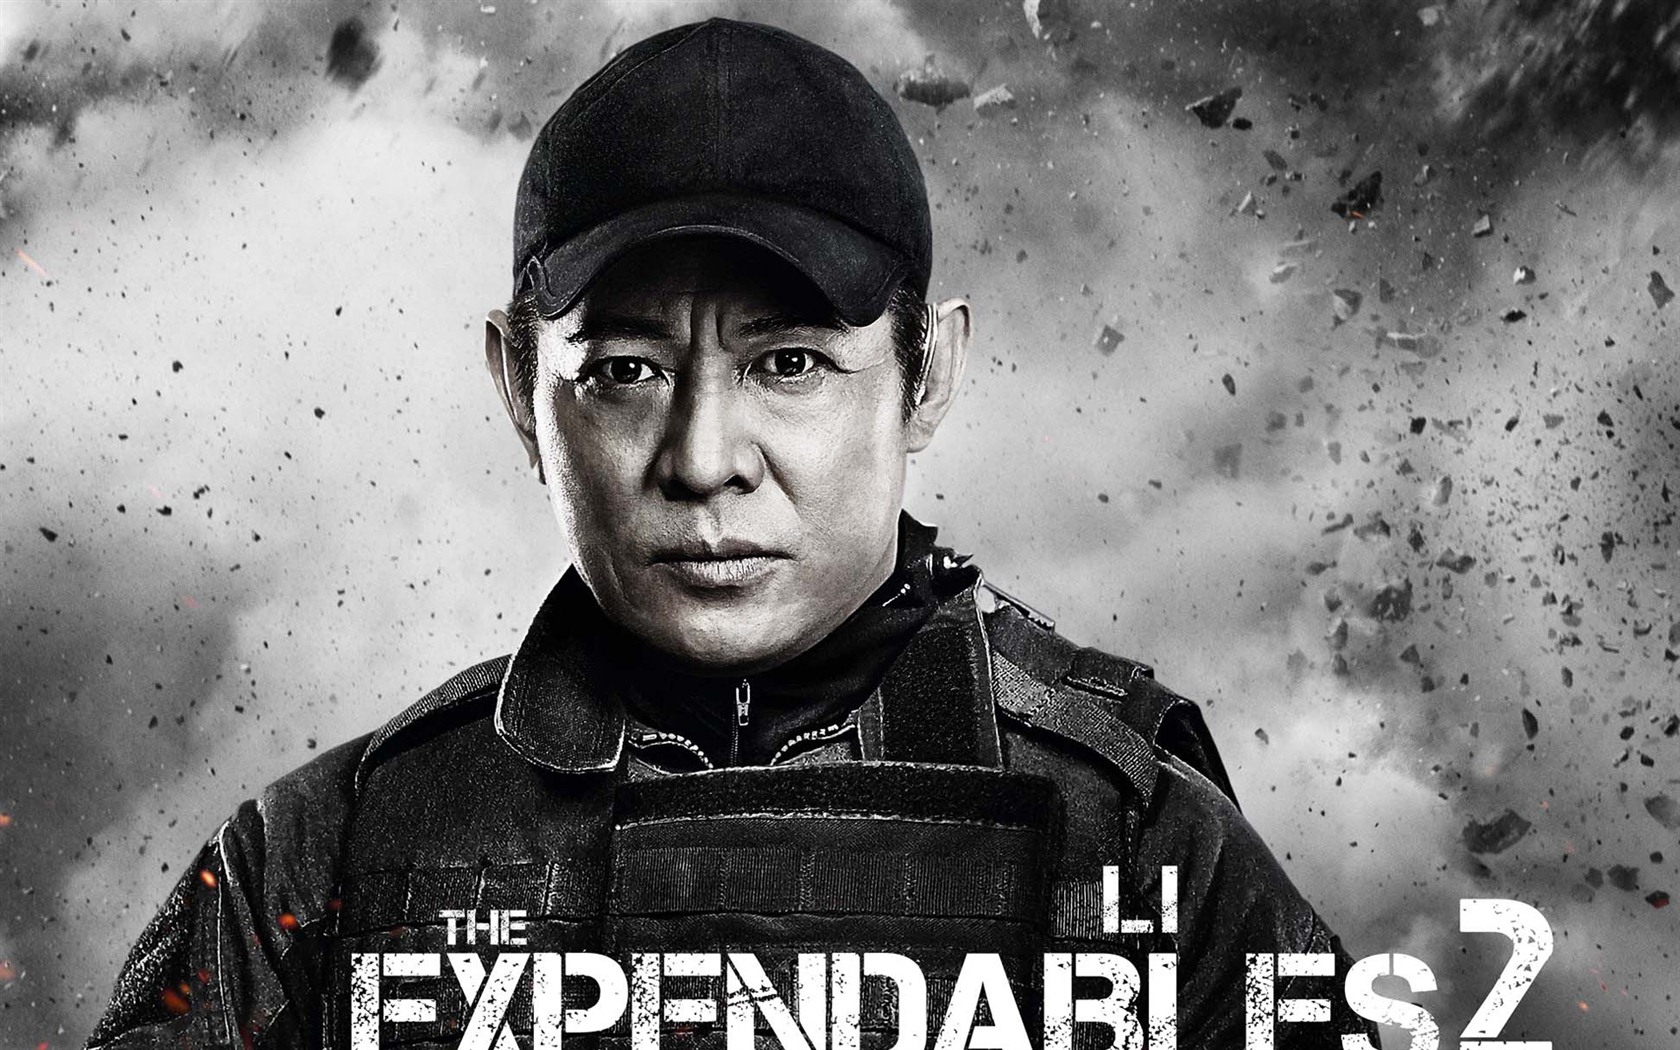 2012 Expendables2 HDの壁紙 #16 - 1680x1050